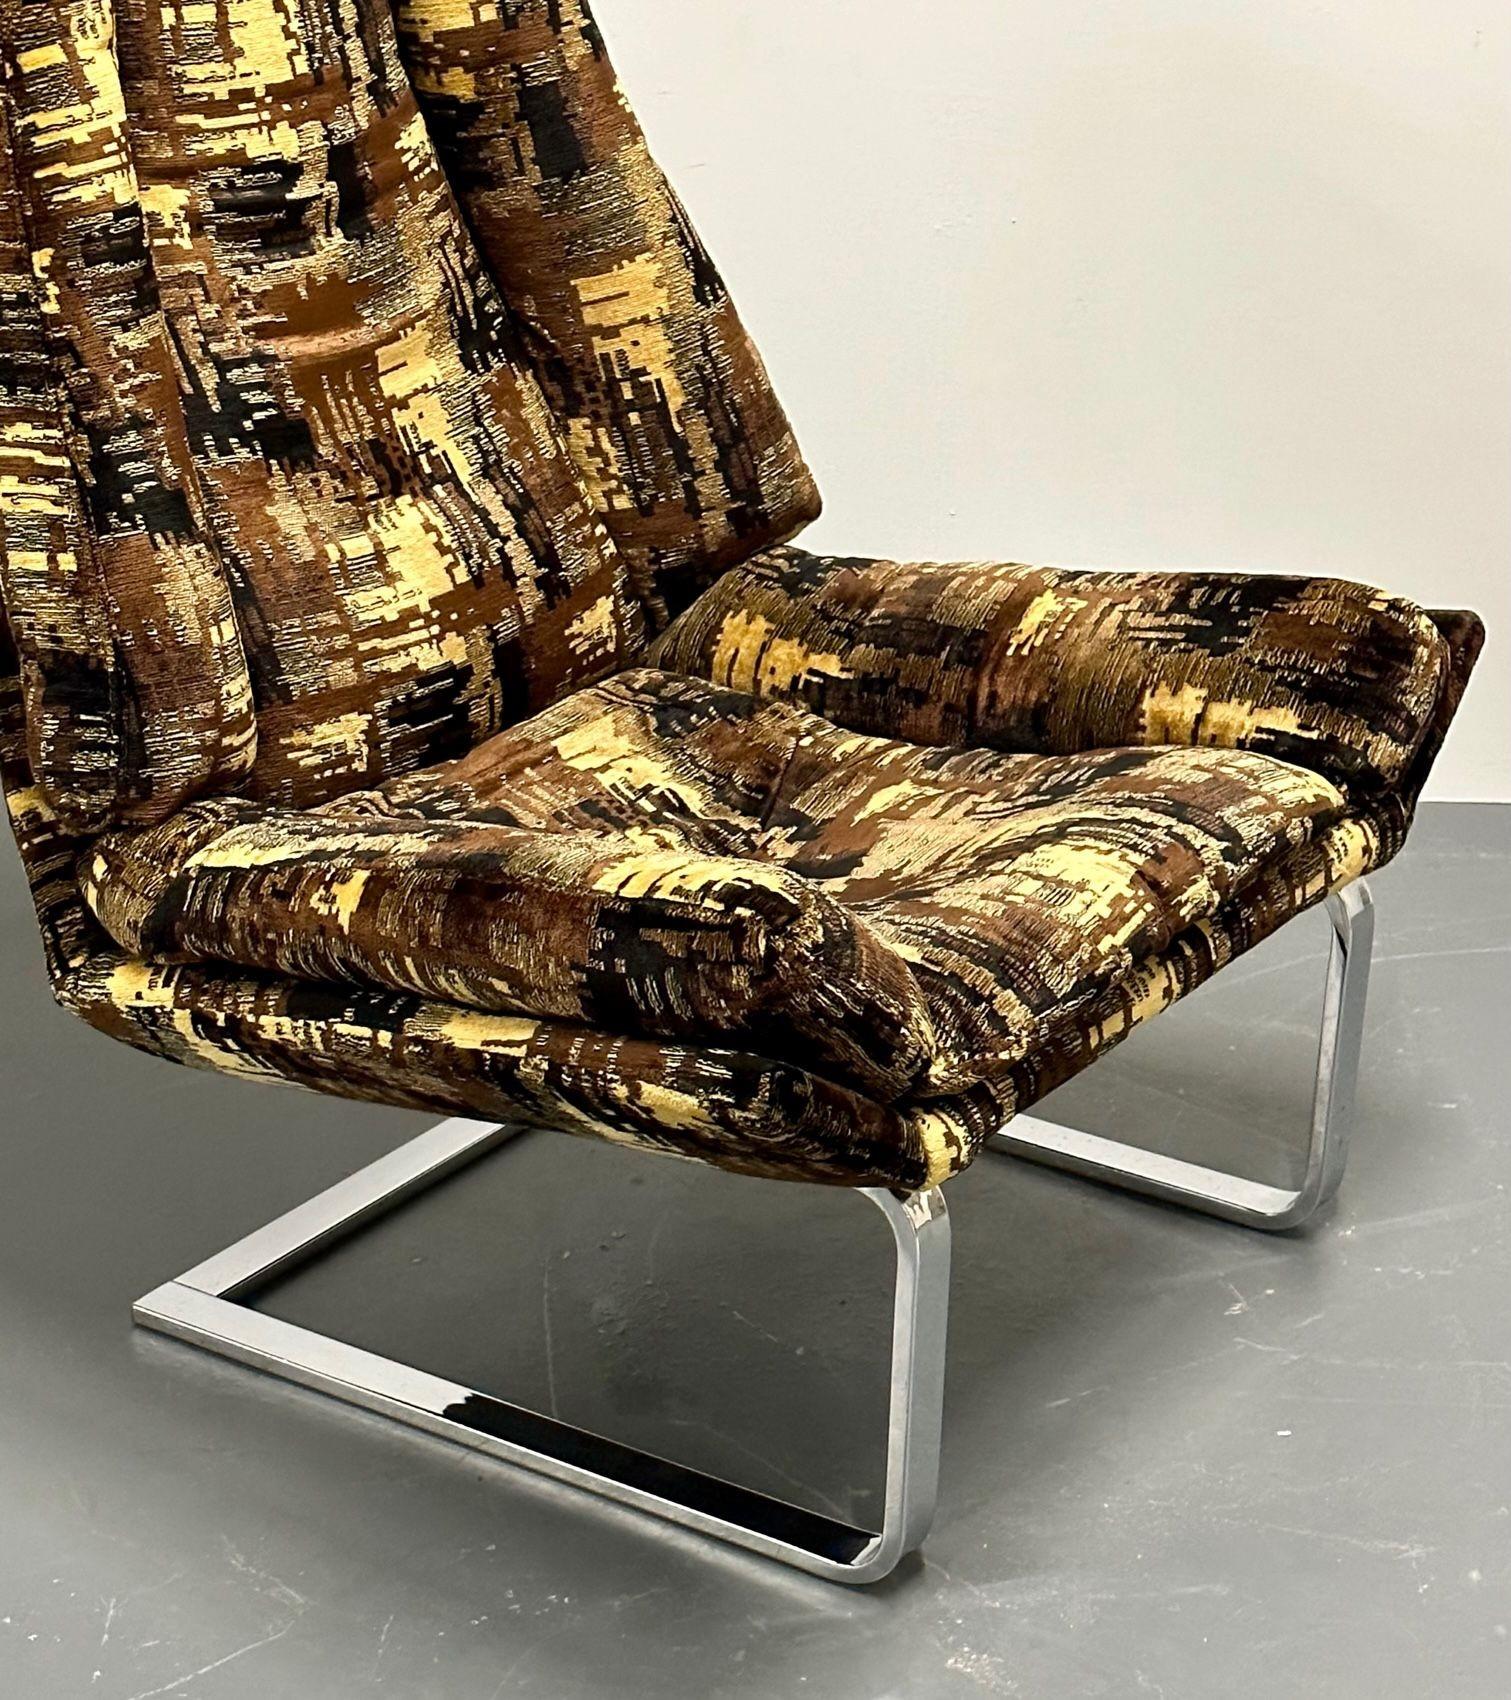 Mid-Century Modern Lounge Chair, Adrian Pearsall Style, American, Chrome, 1950s For Sale 4